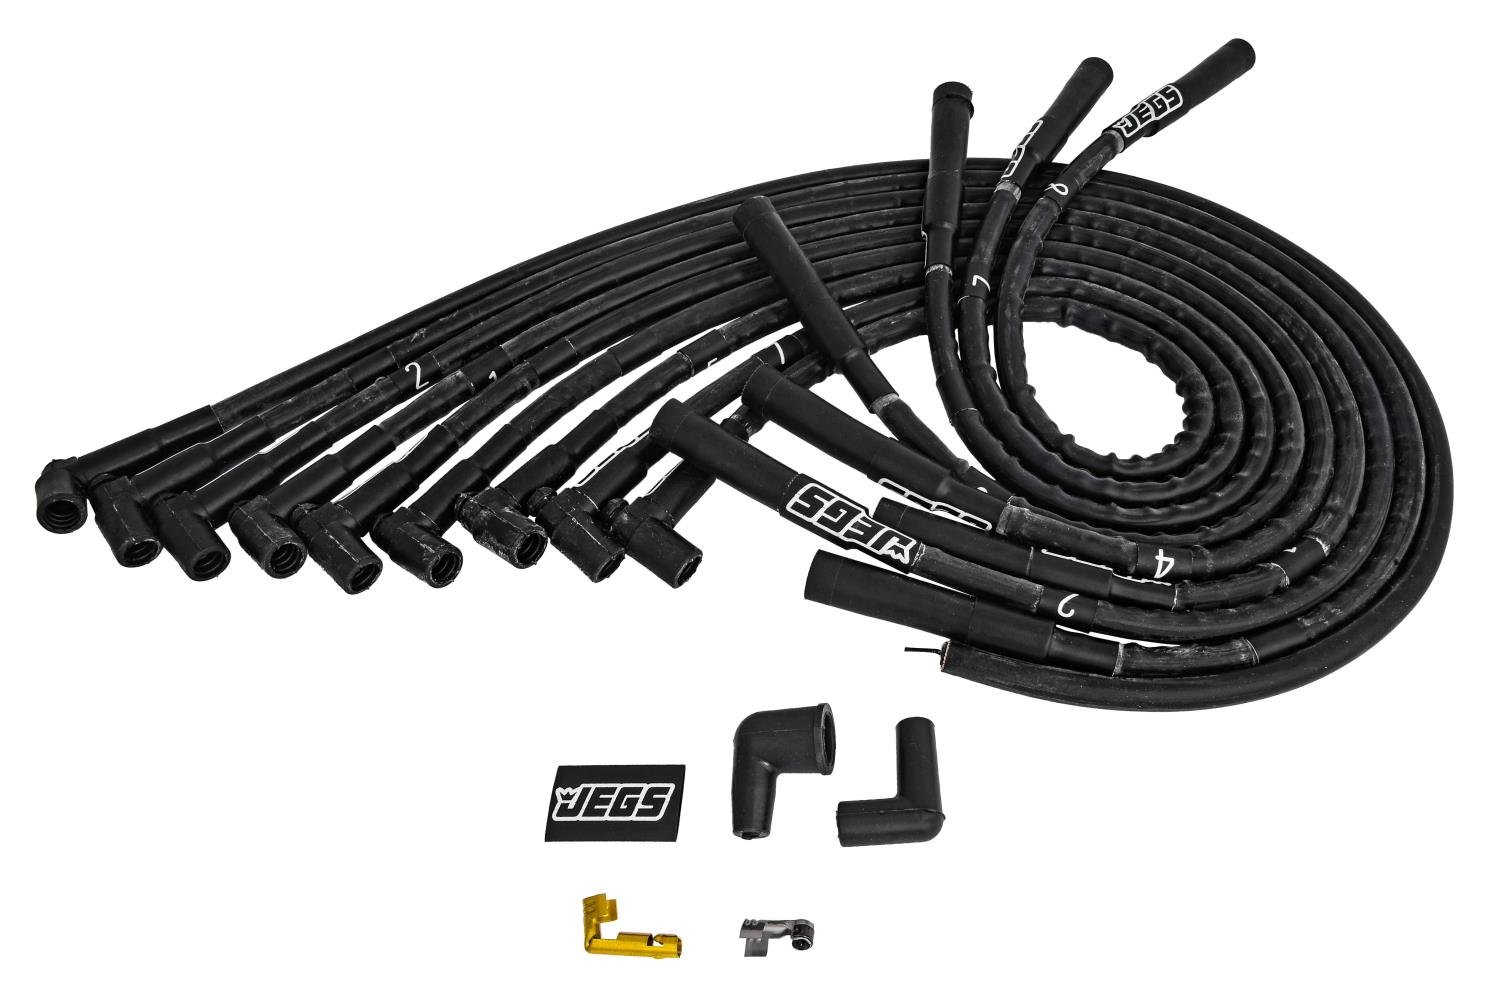 8mm Hi-Temp Sleeved Spark Plug Wire Set for Big Block Chevy 396, 402, & 454 w/HEI, Over Valve Cover w/Straight Boots [Black]